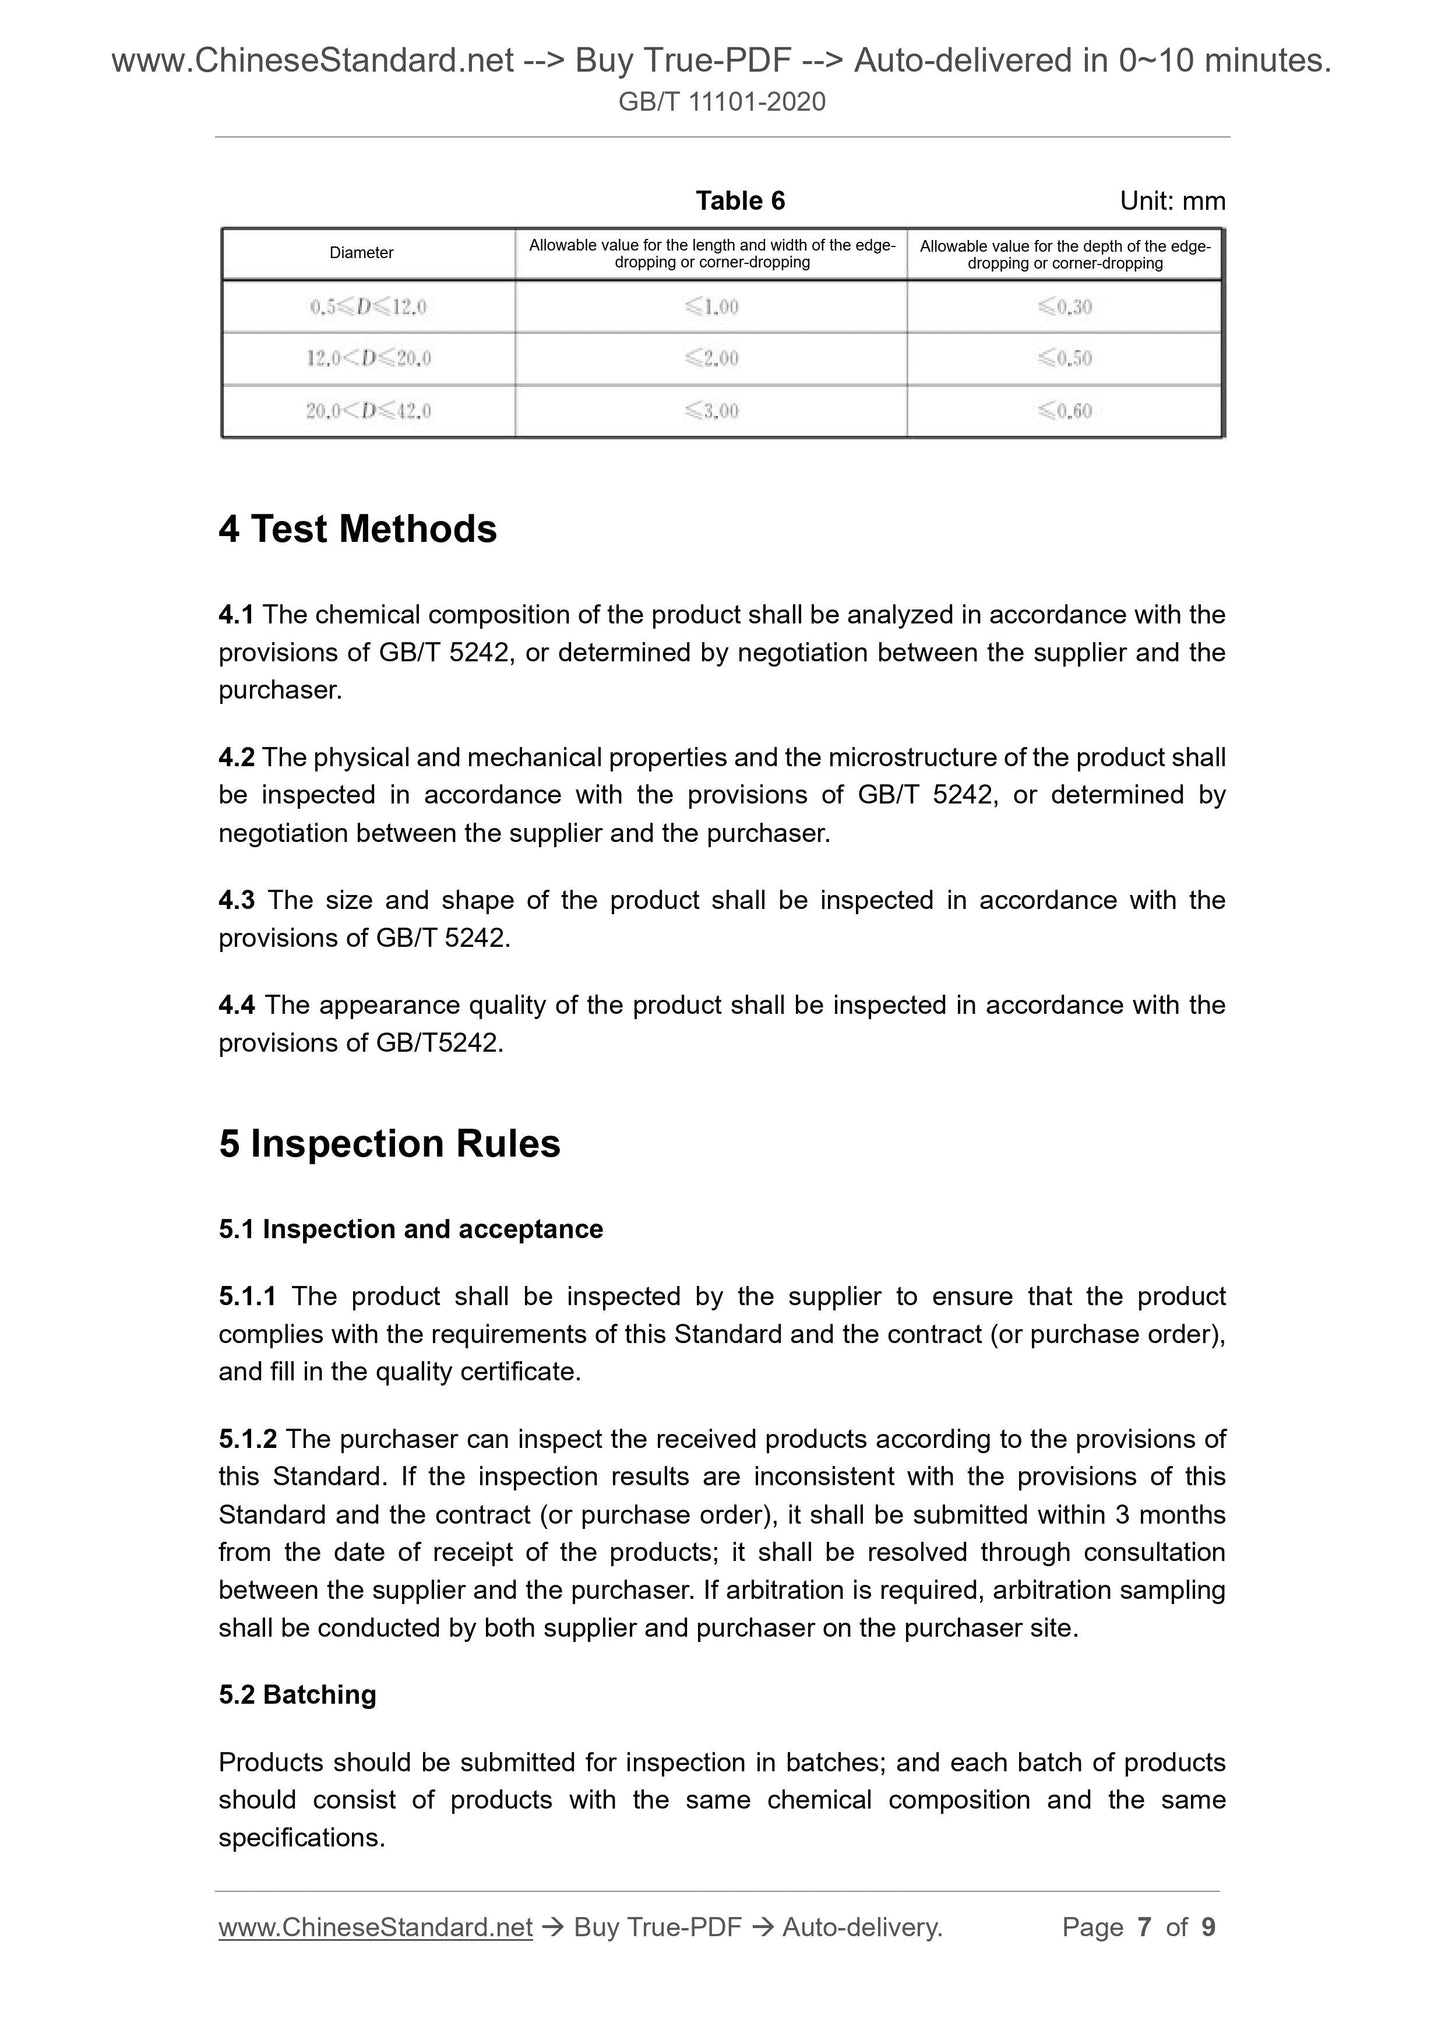 GB/T 11101-2020 Page 5